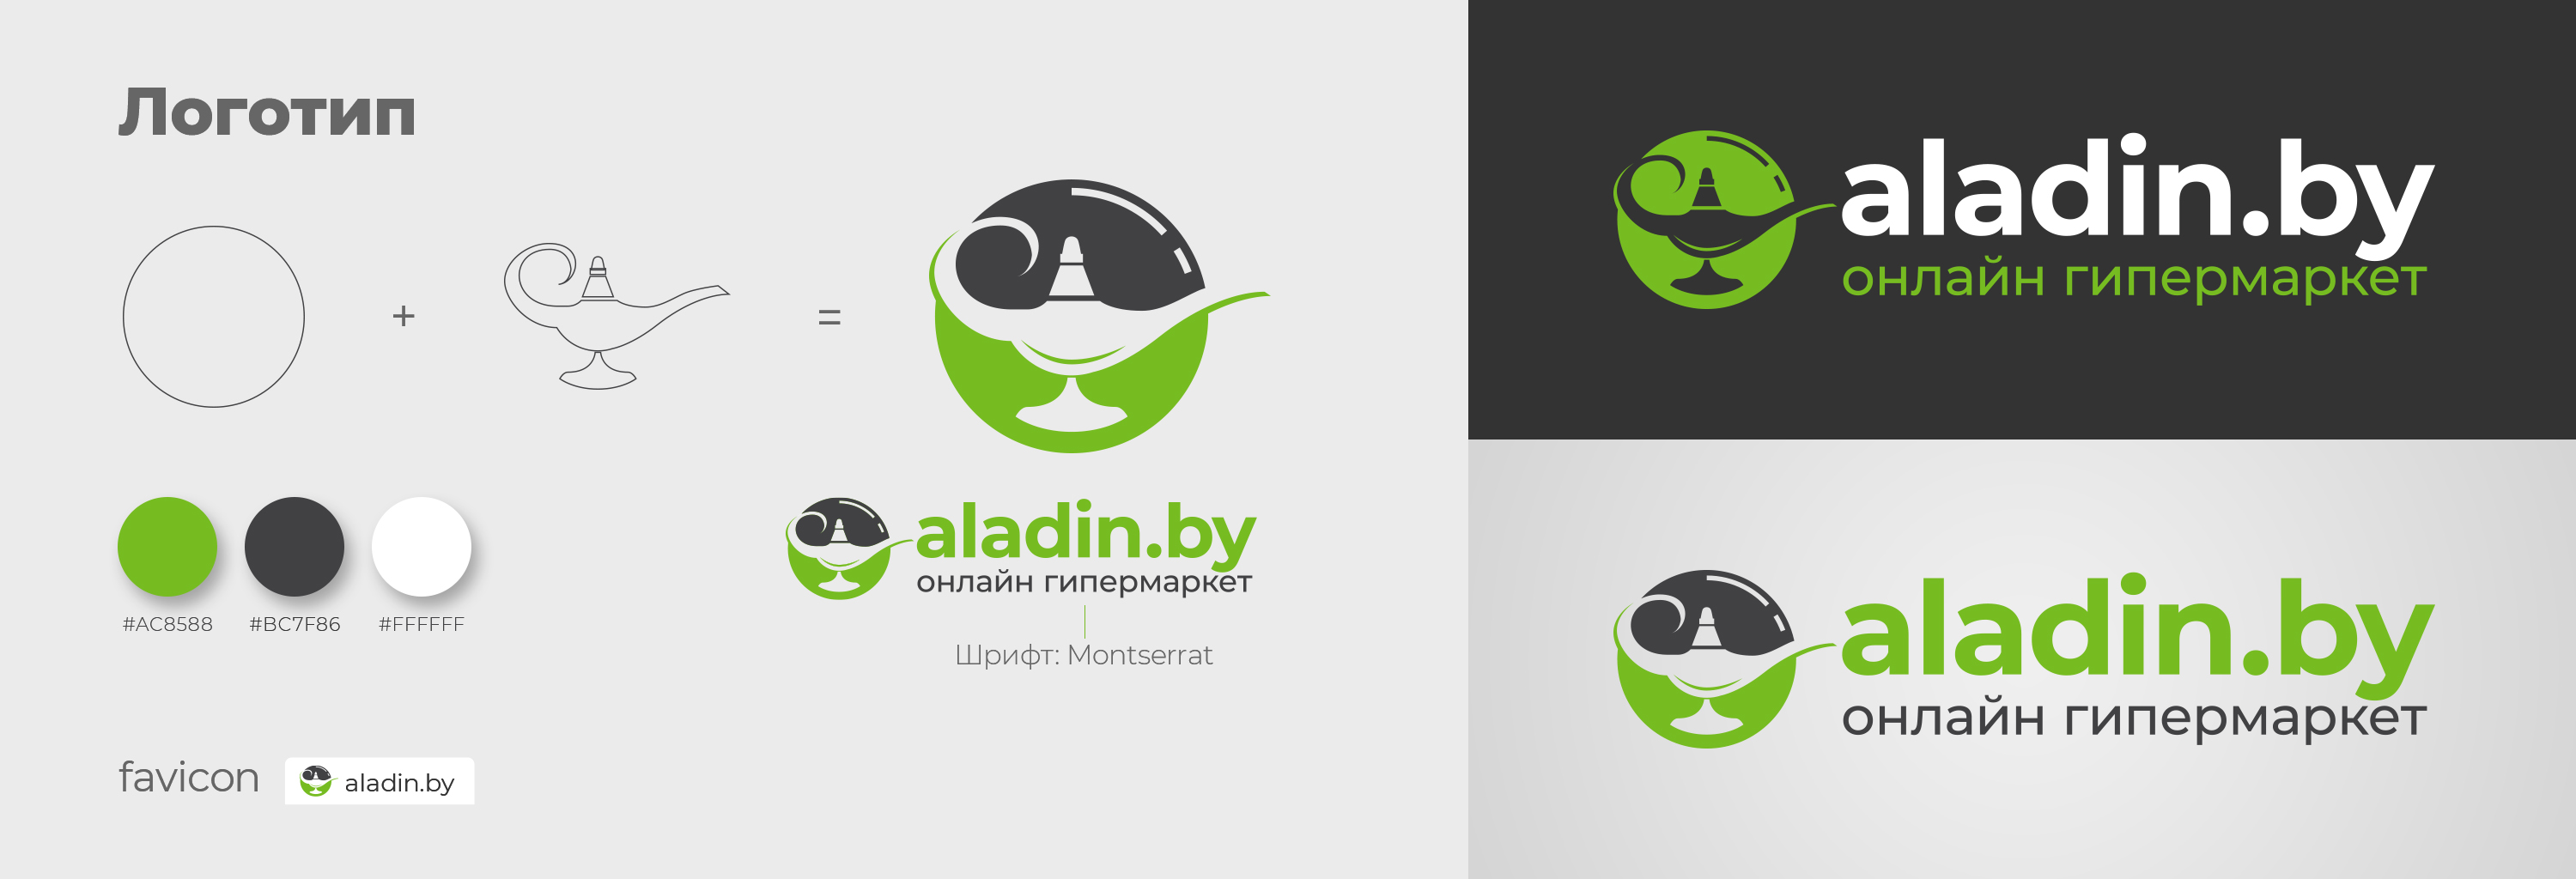 aladin.by